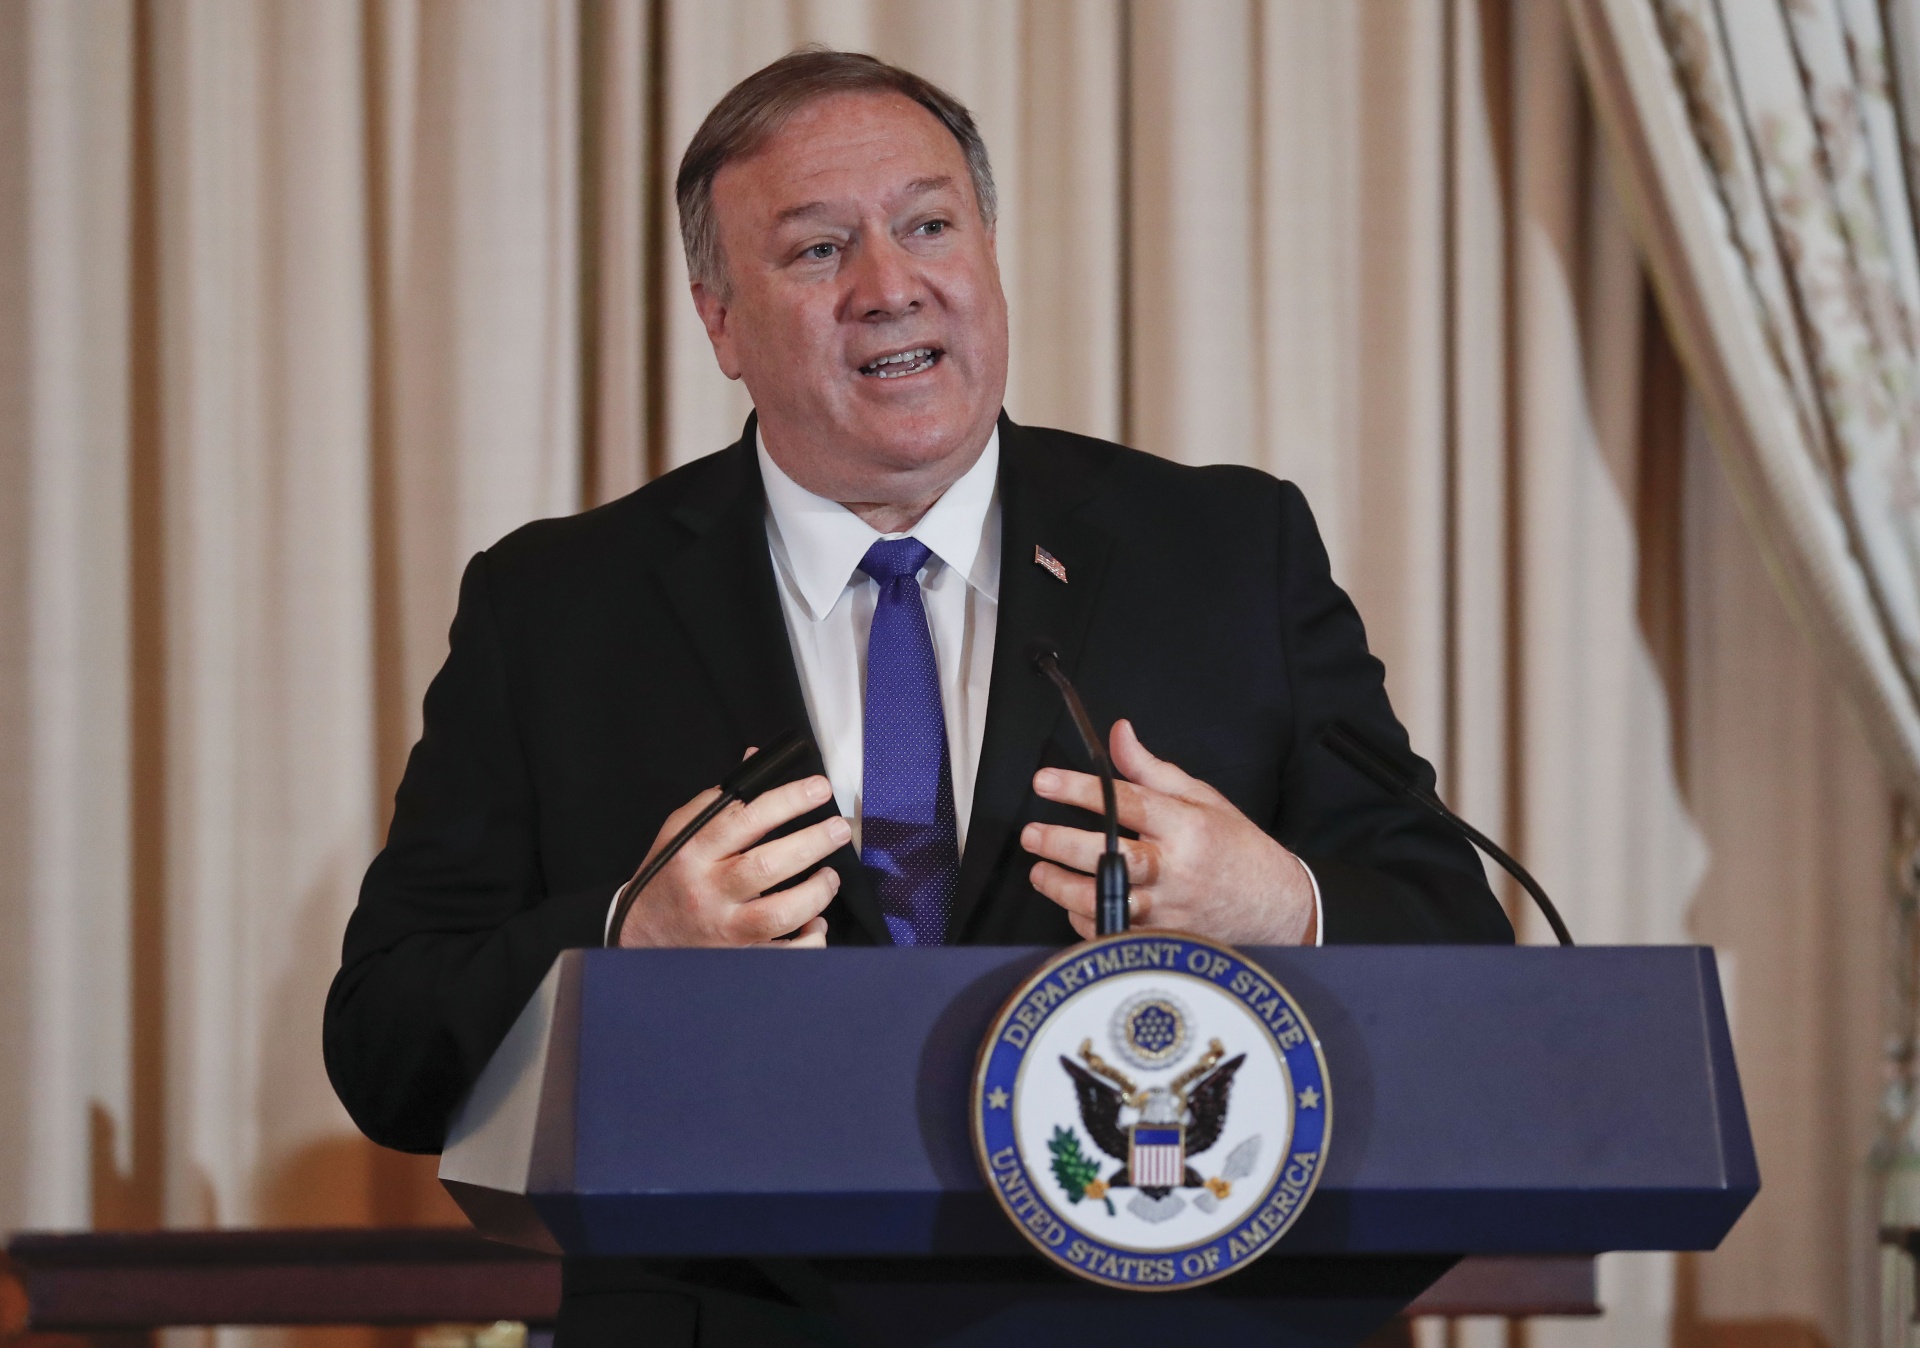 US secretary of state and former CIA director Mike Pompeo